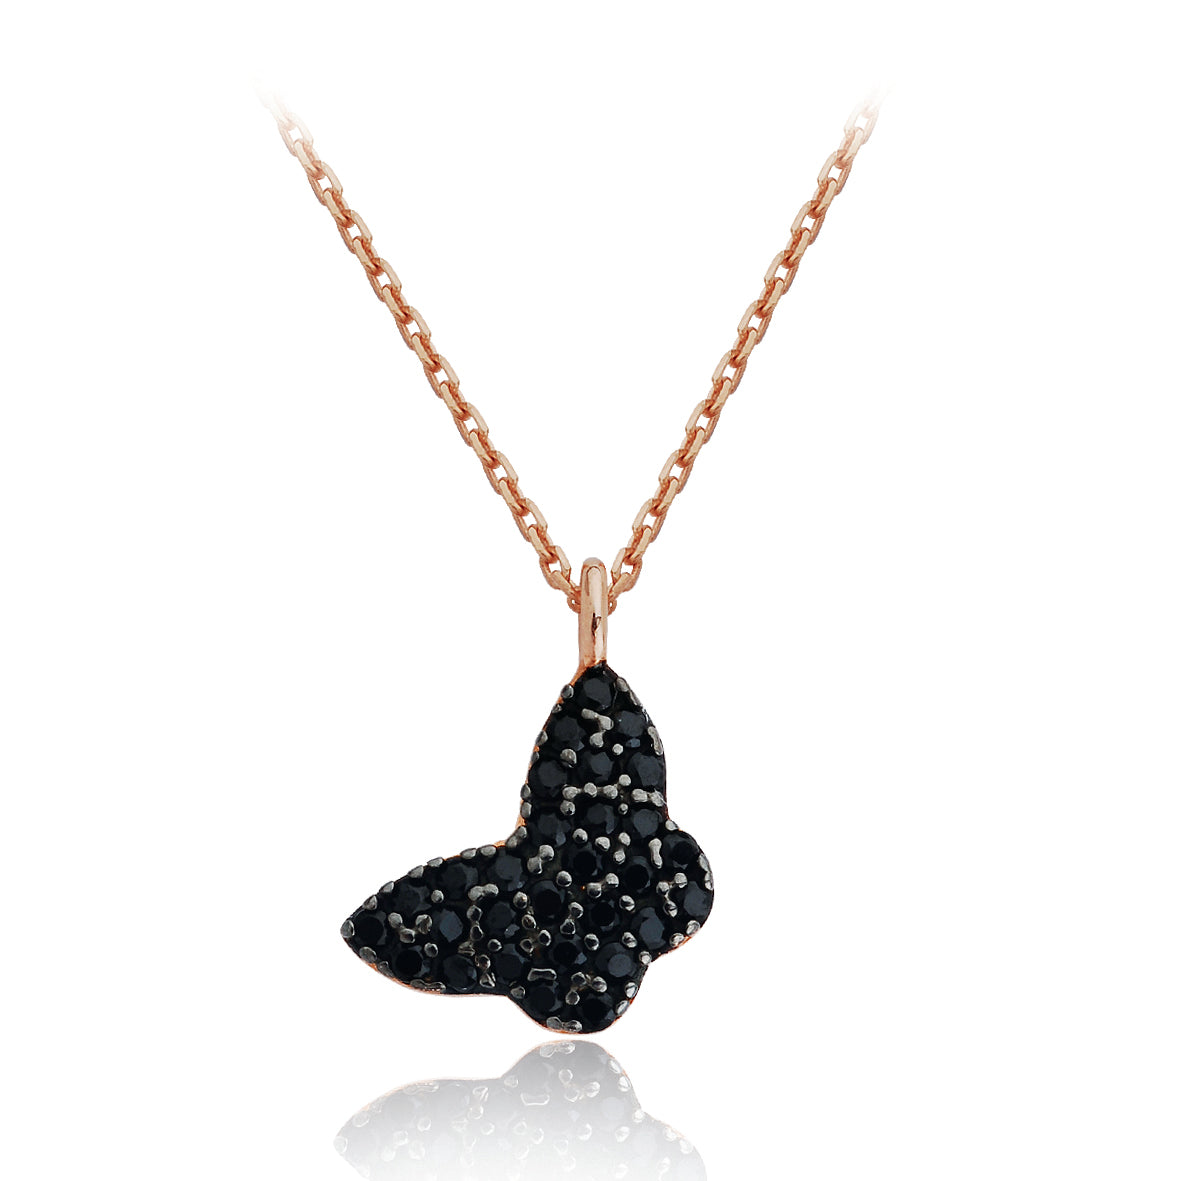 Minimalist butterfly necklace with black stones